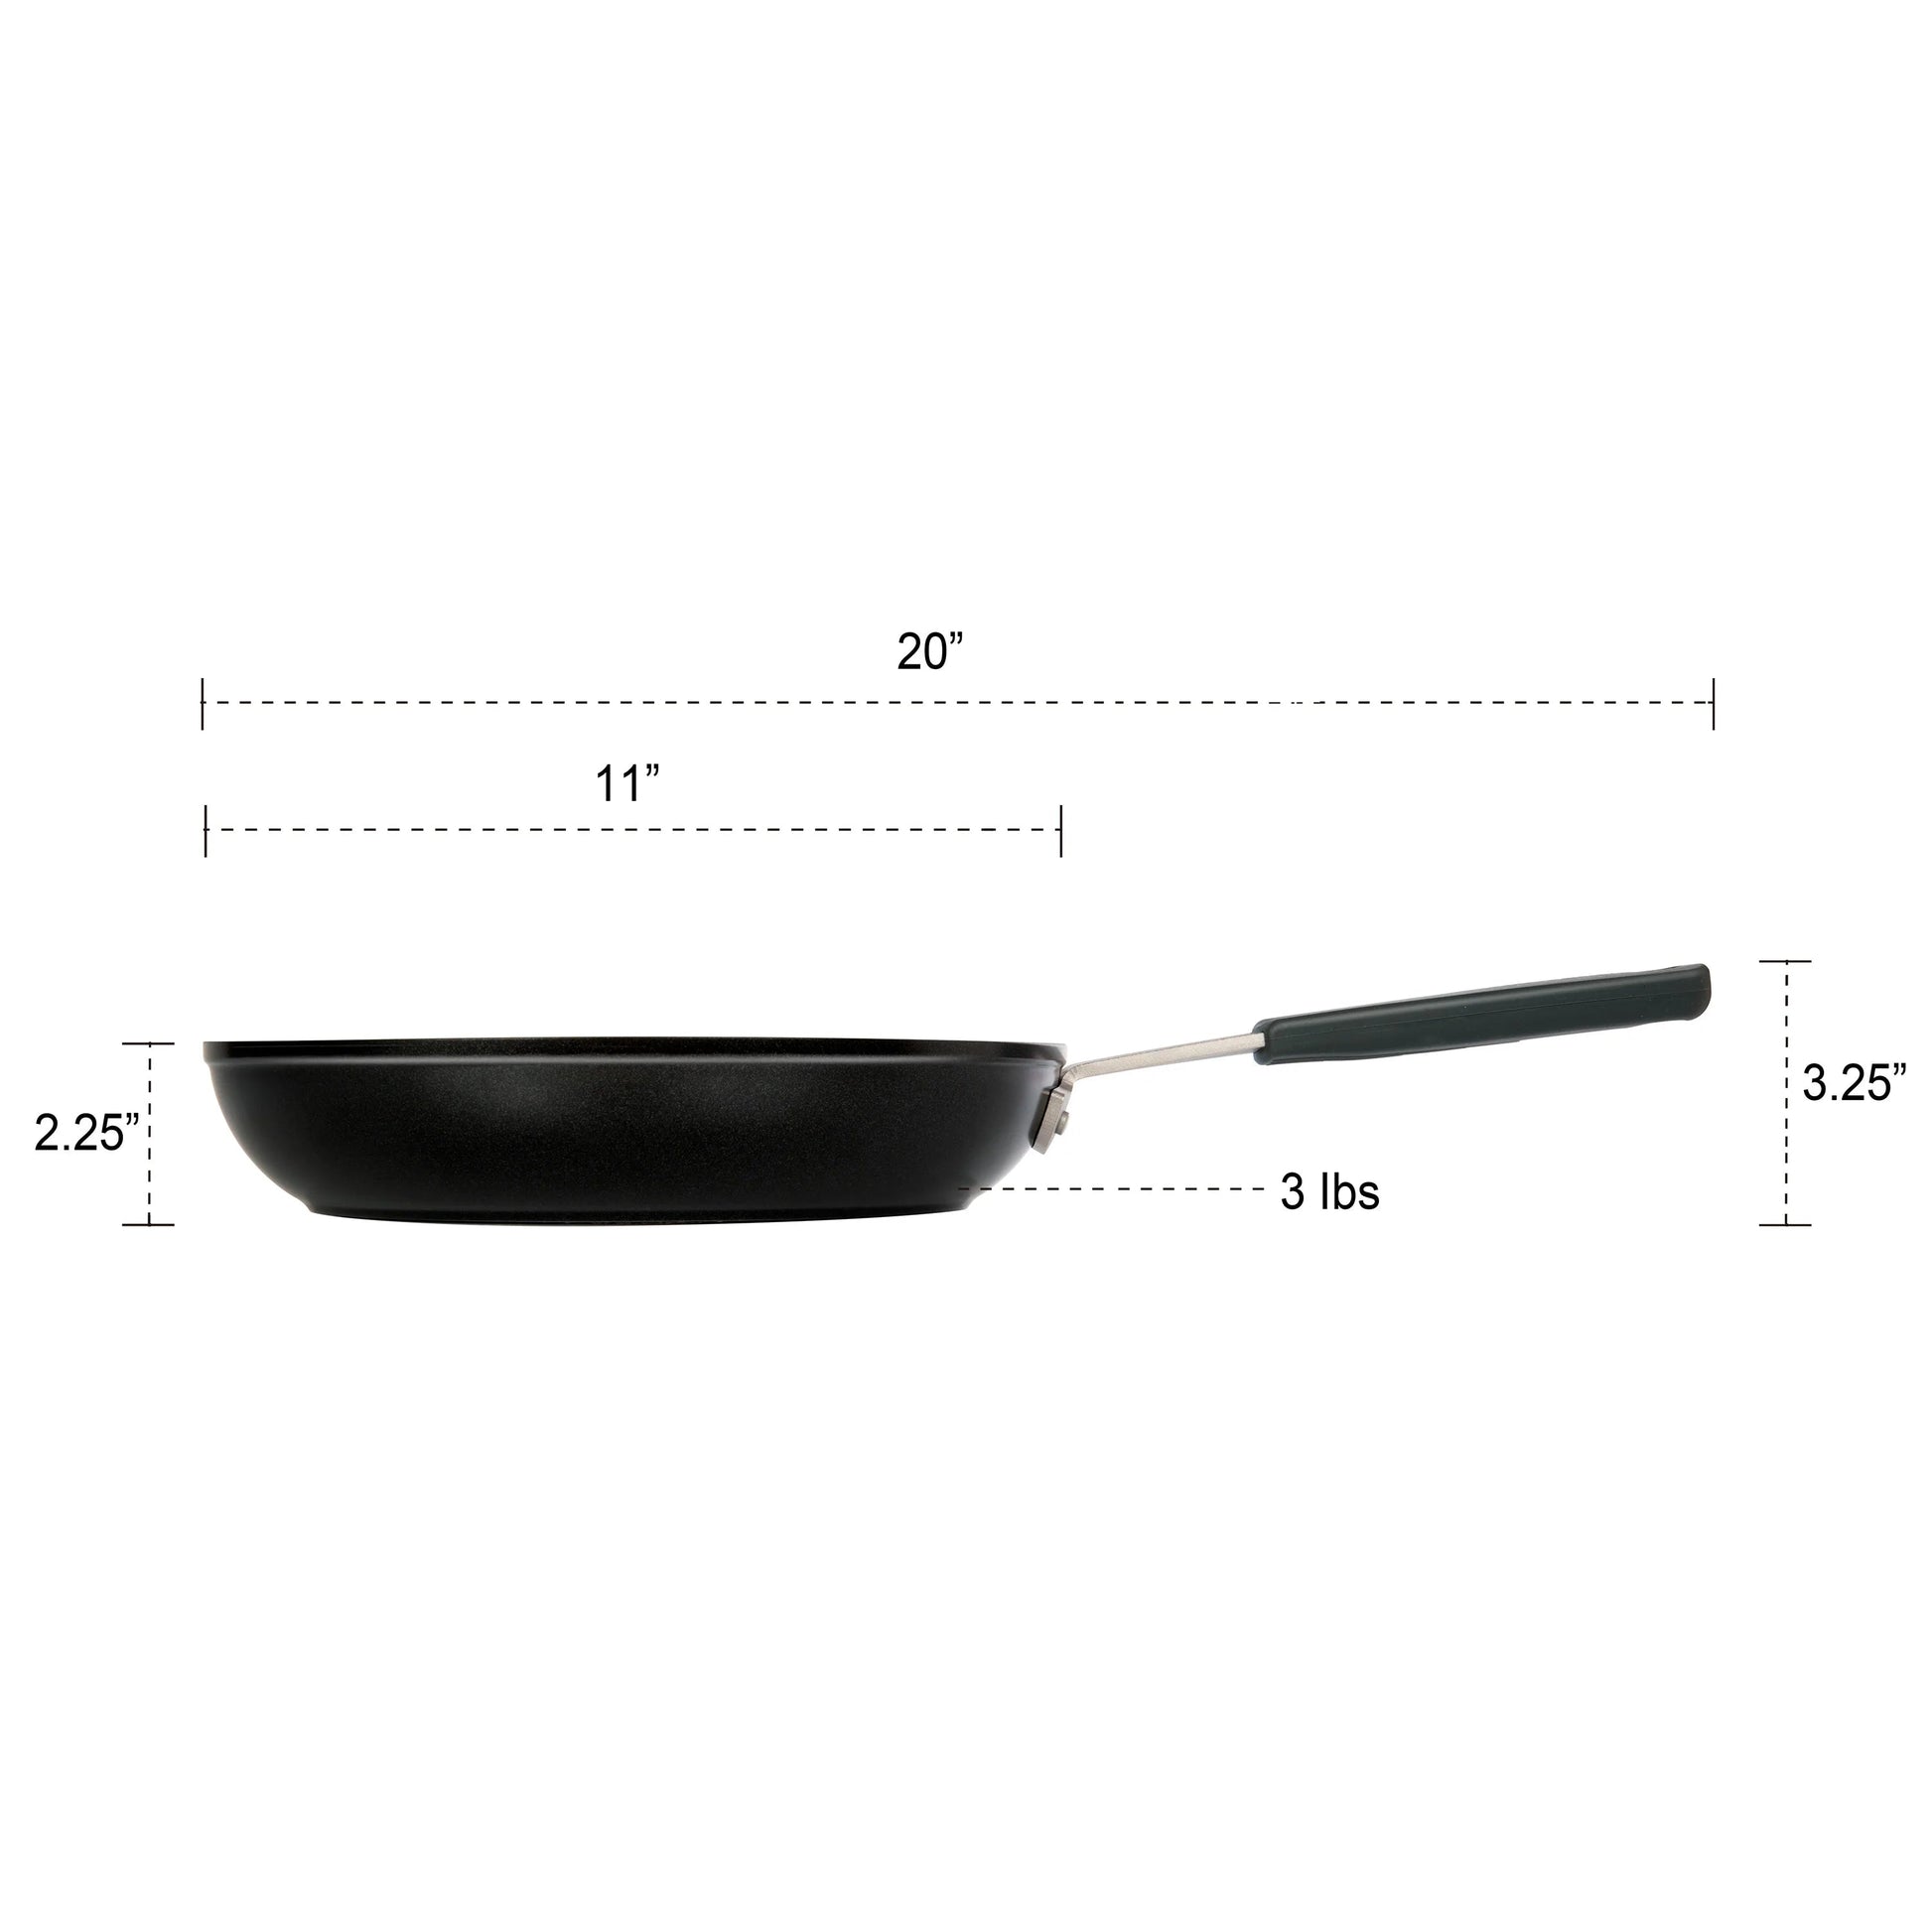 Cast Aluminum Non-Stick Pan With Detachable Stainless Steel Handle